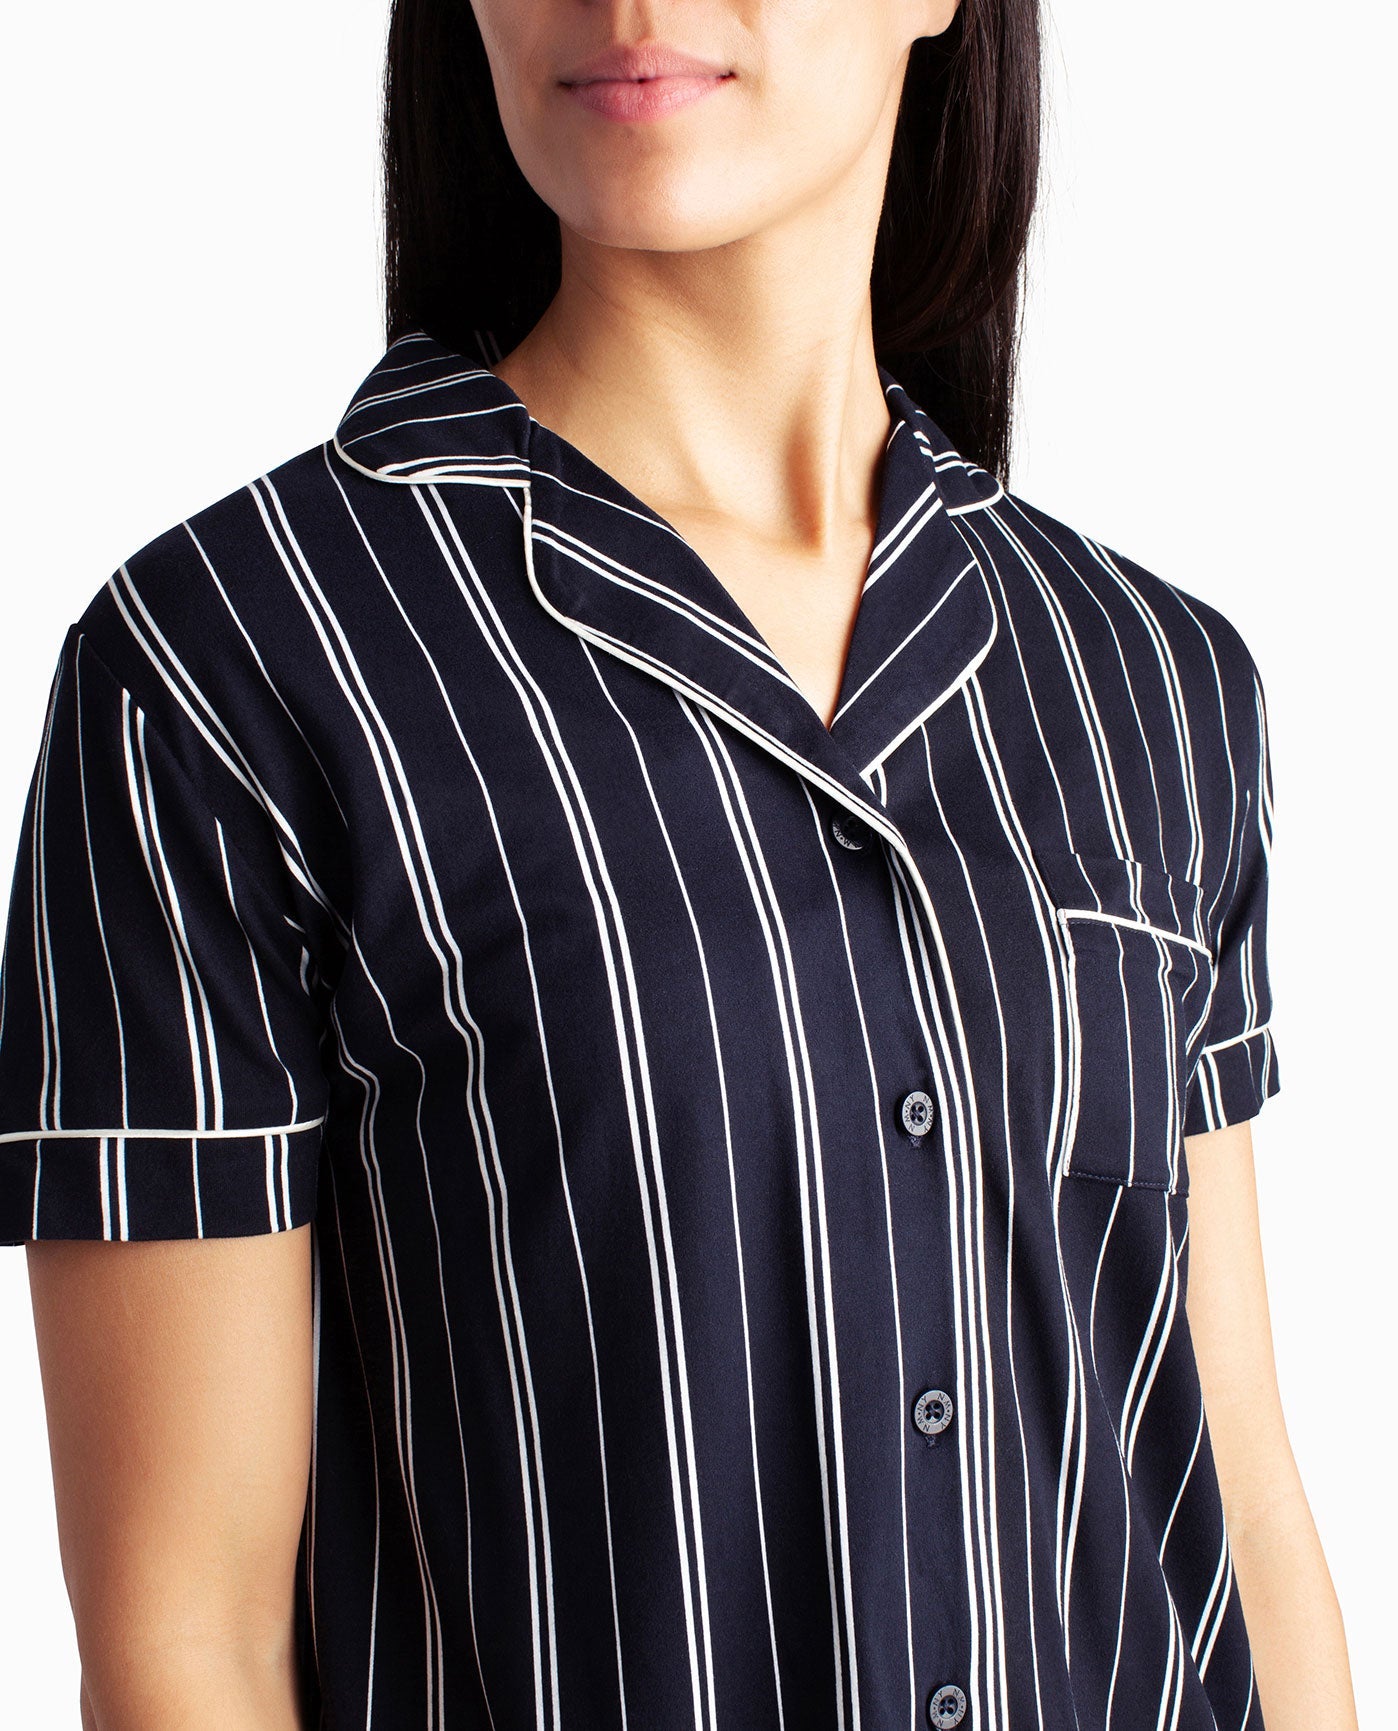 NECKLINE OF PEACHED JERSEY SHIRT AND PANT TWO-PIECE SLEEPWEAR SET | Stormy Night Vertical Stripe